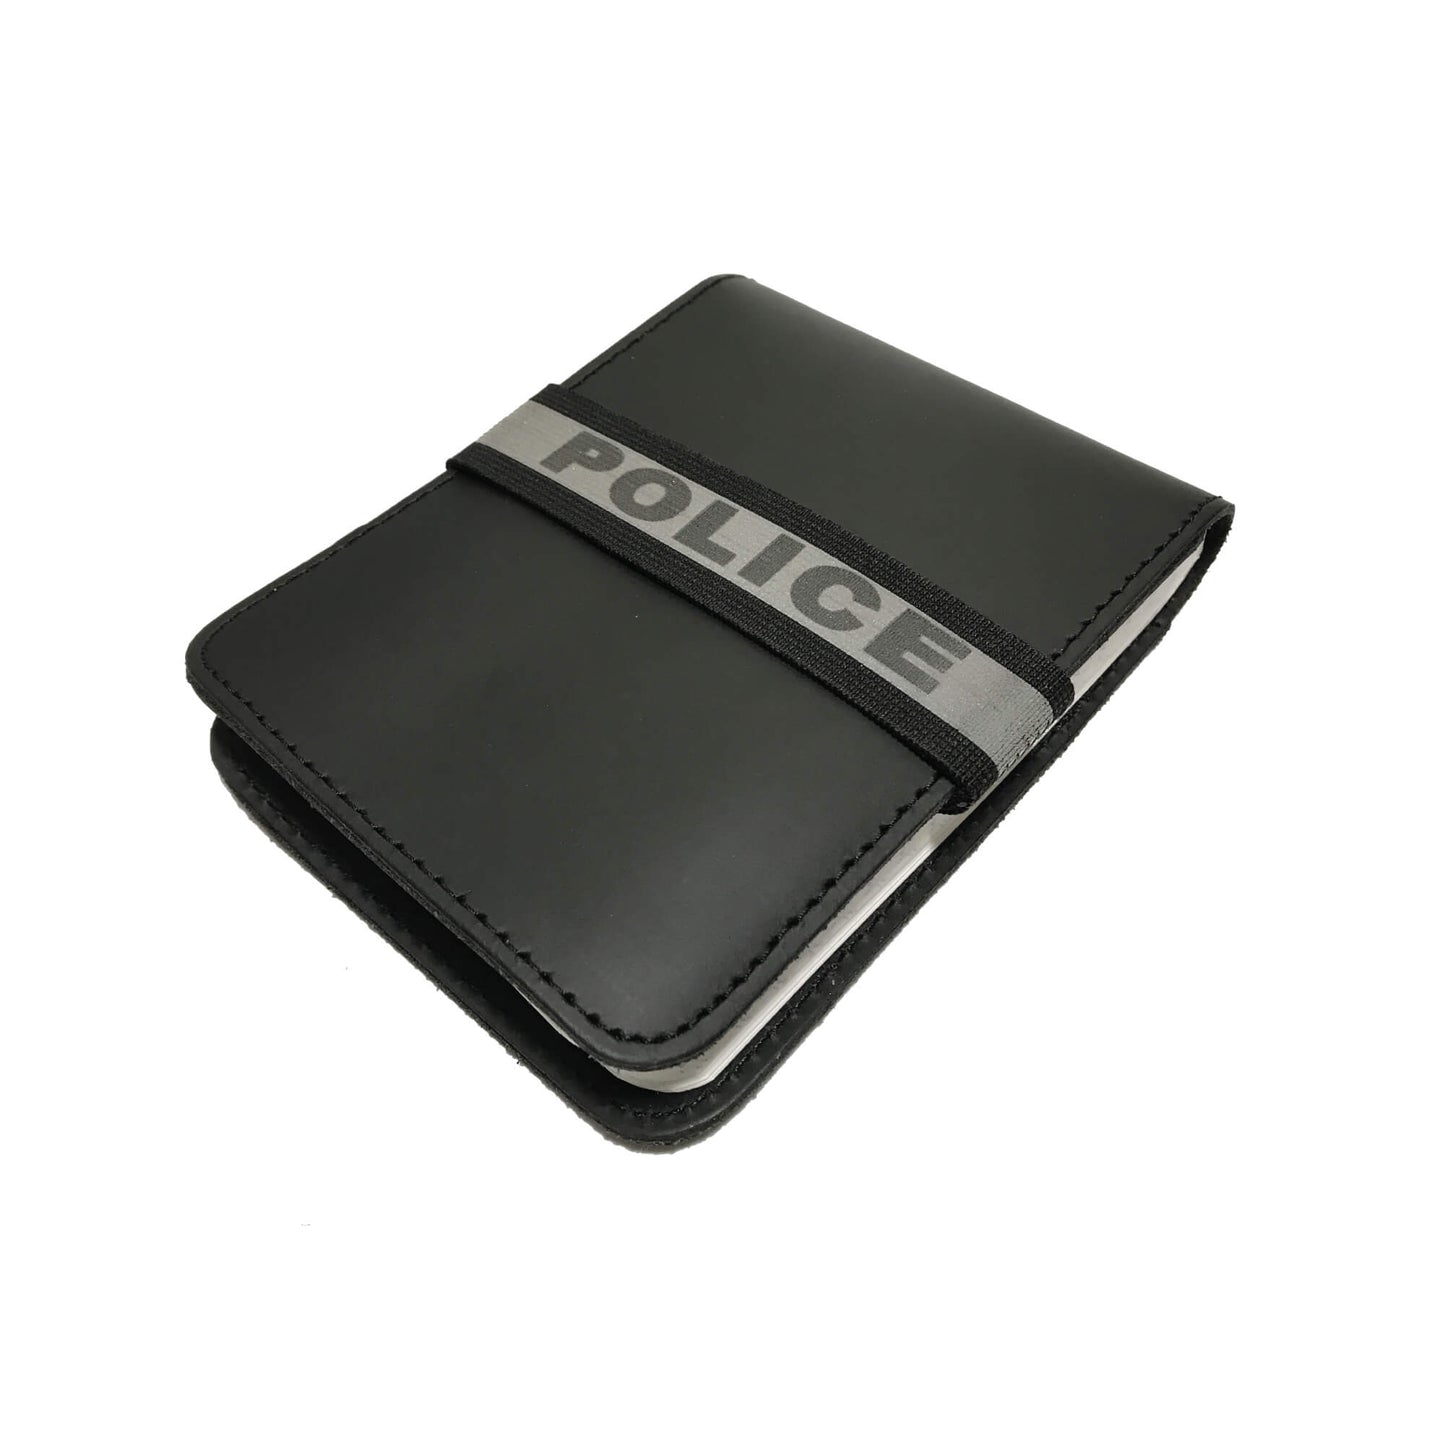 Halifax Regional Fire Notebook Cover-Perfect Fit-911 Duty Gear Canada